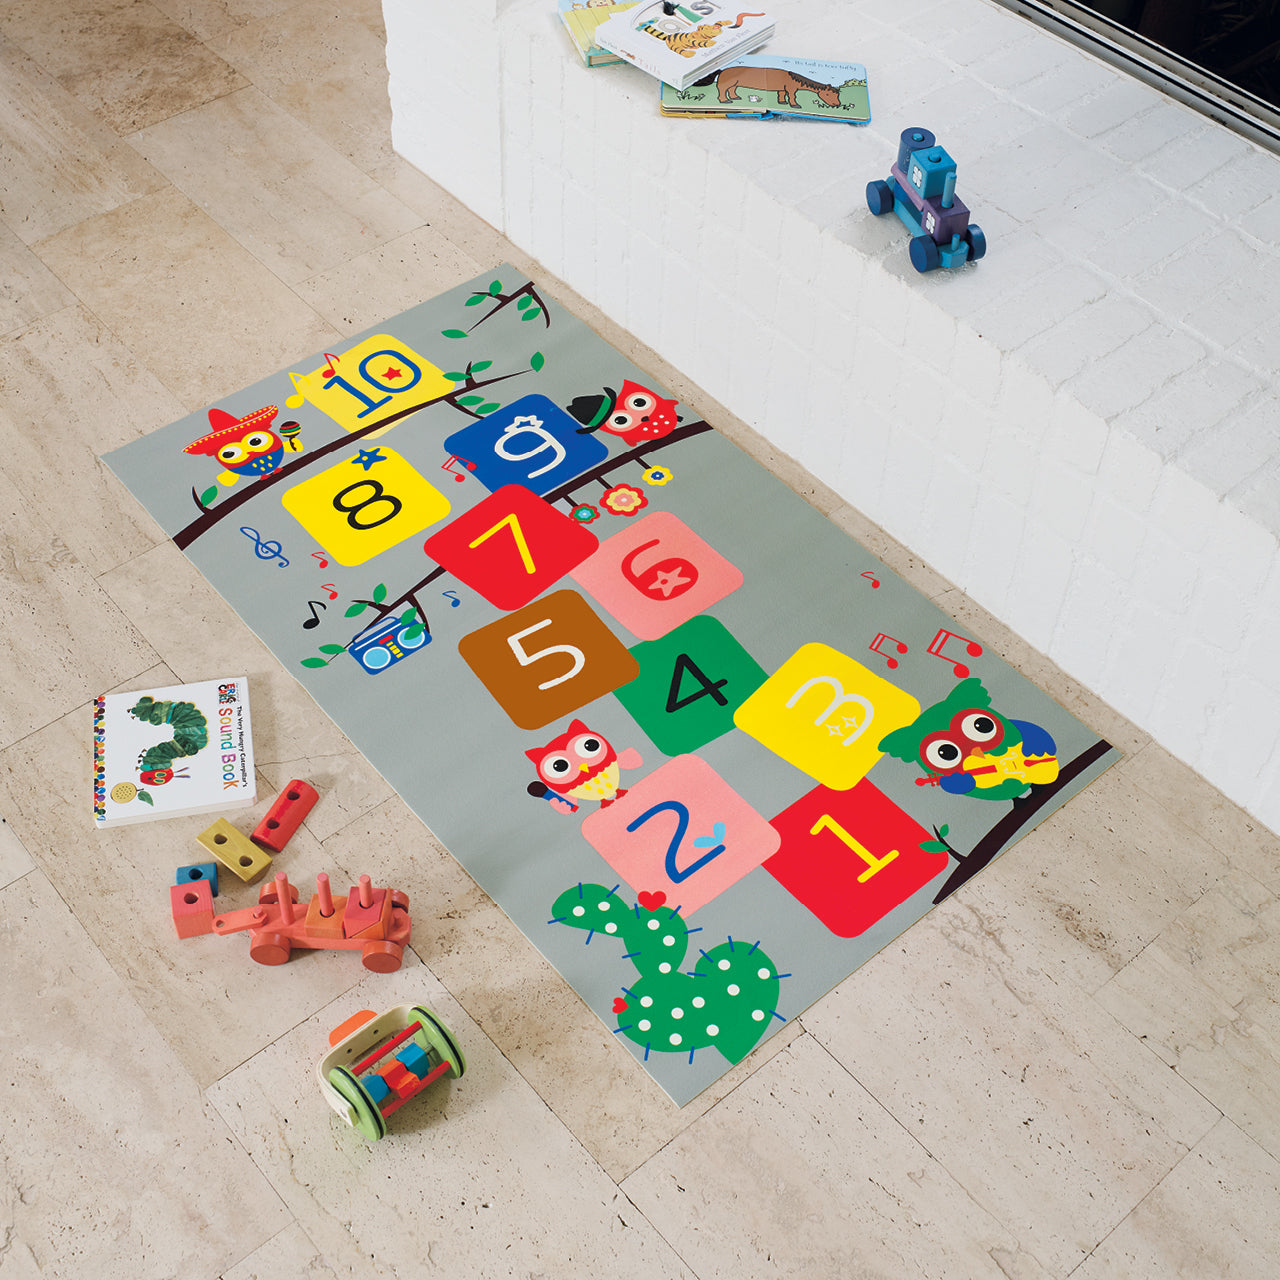 Kids Hopscotch Playmat on floor with toys